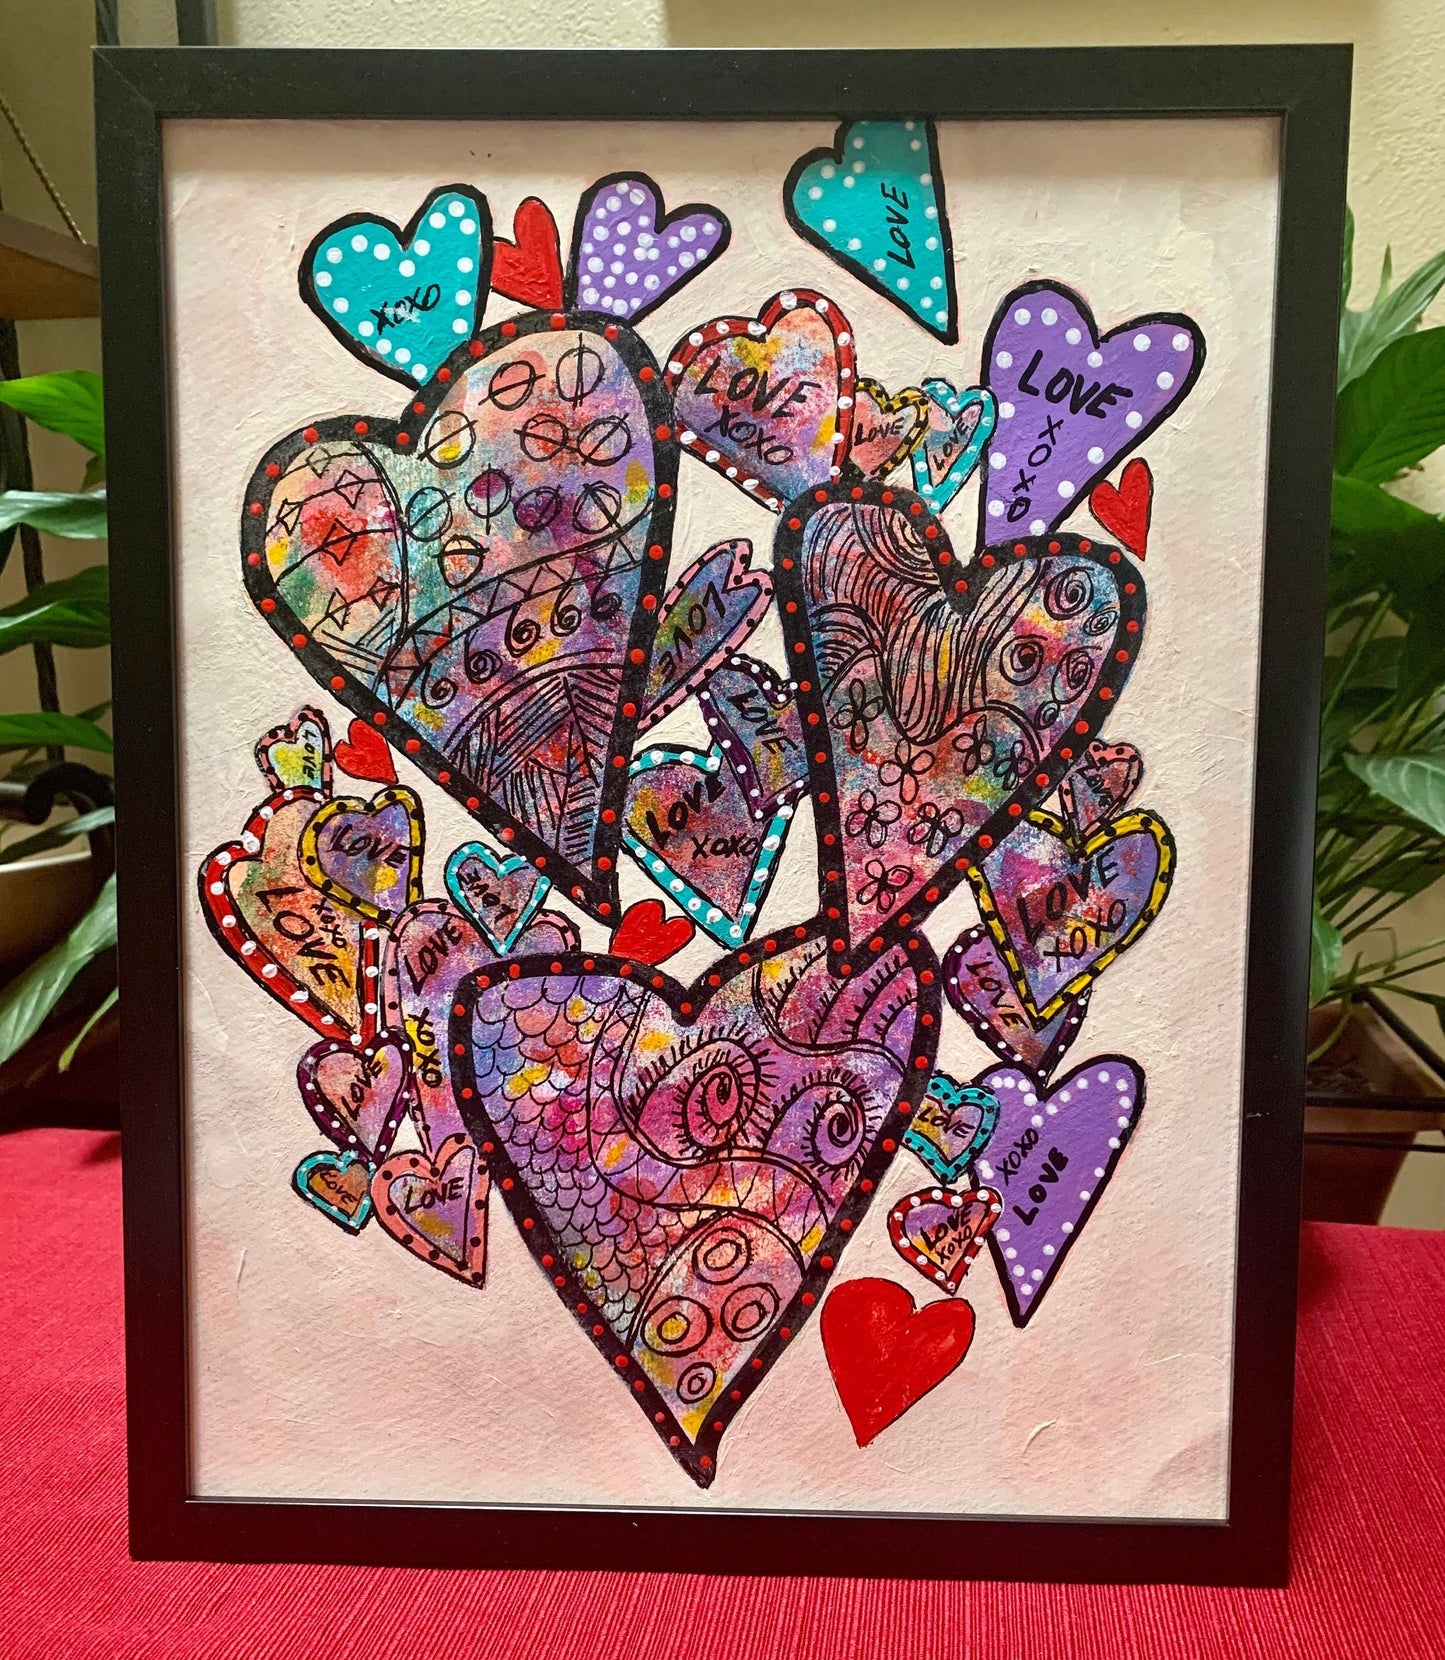 Colorful Graffiti Heart Love Painting for wall decor Perfect appreciation gift Rainbow color art Black frame ready to hang